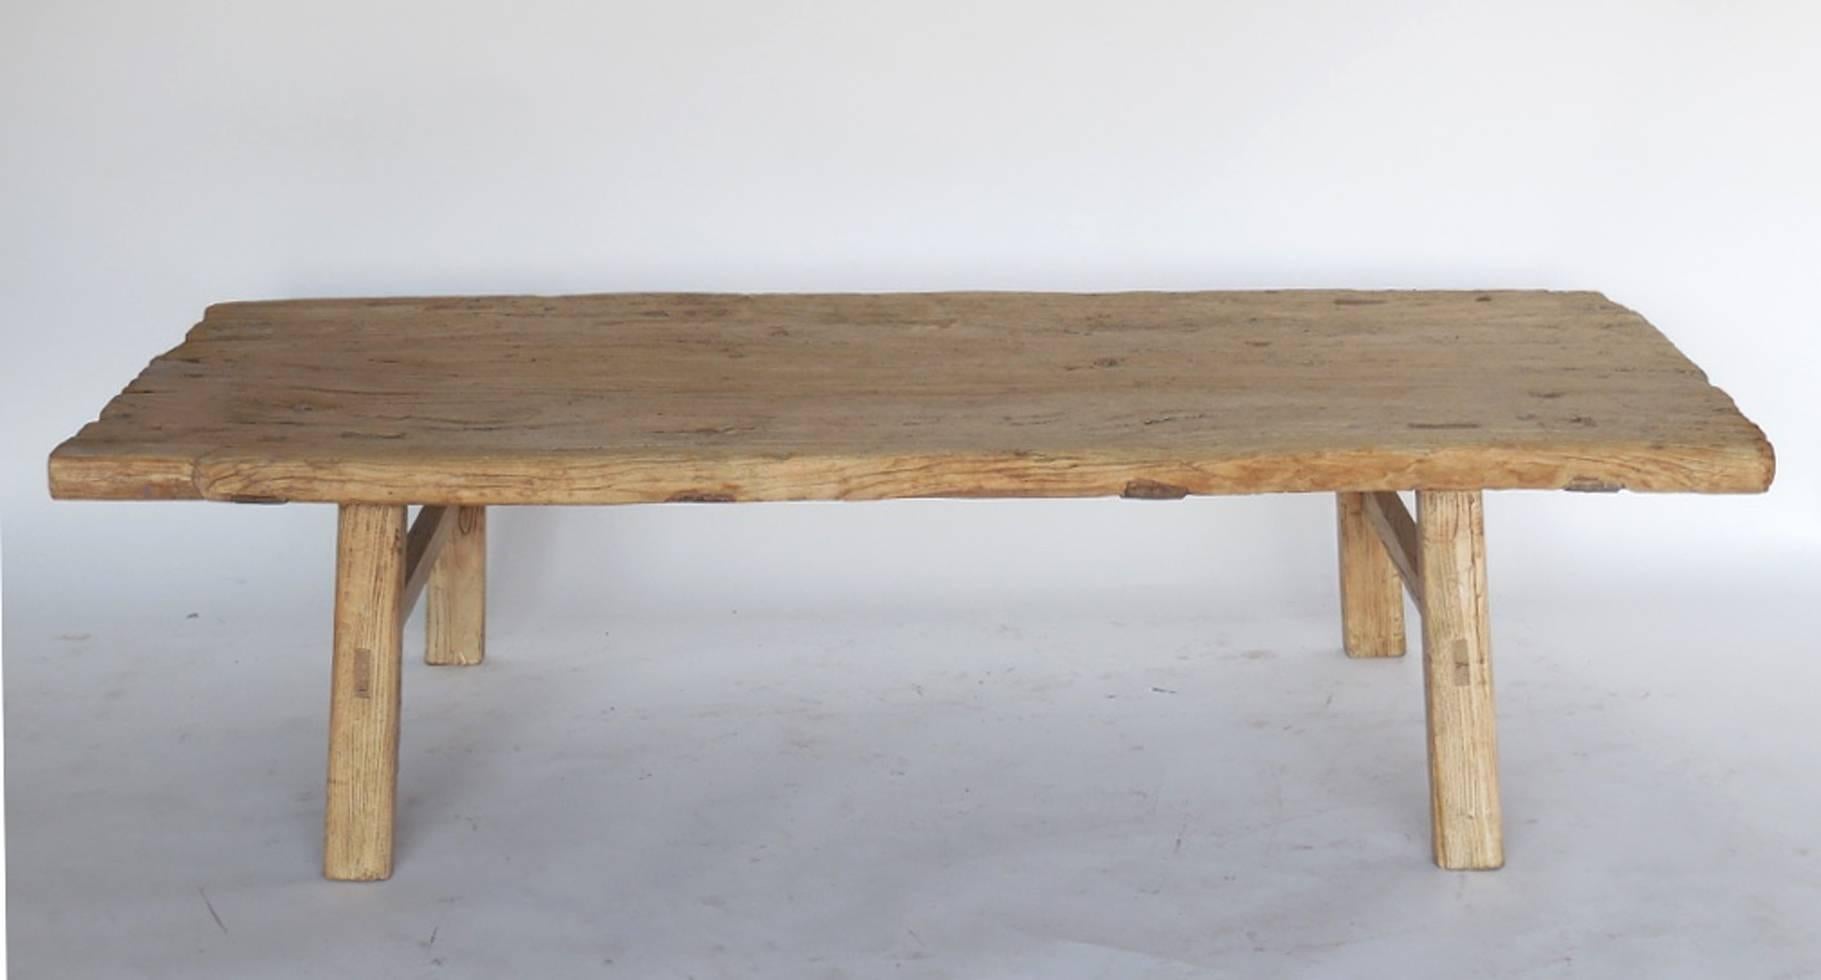 Primitive Japanese Elm Wood Coffee Table with Natural Driftwood Patina